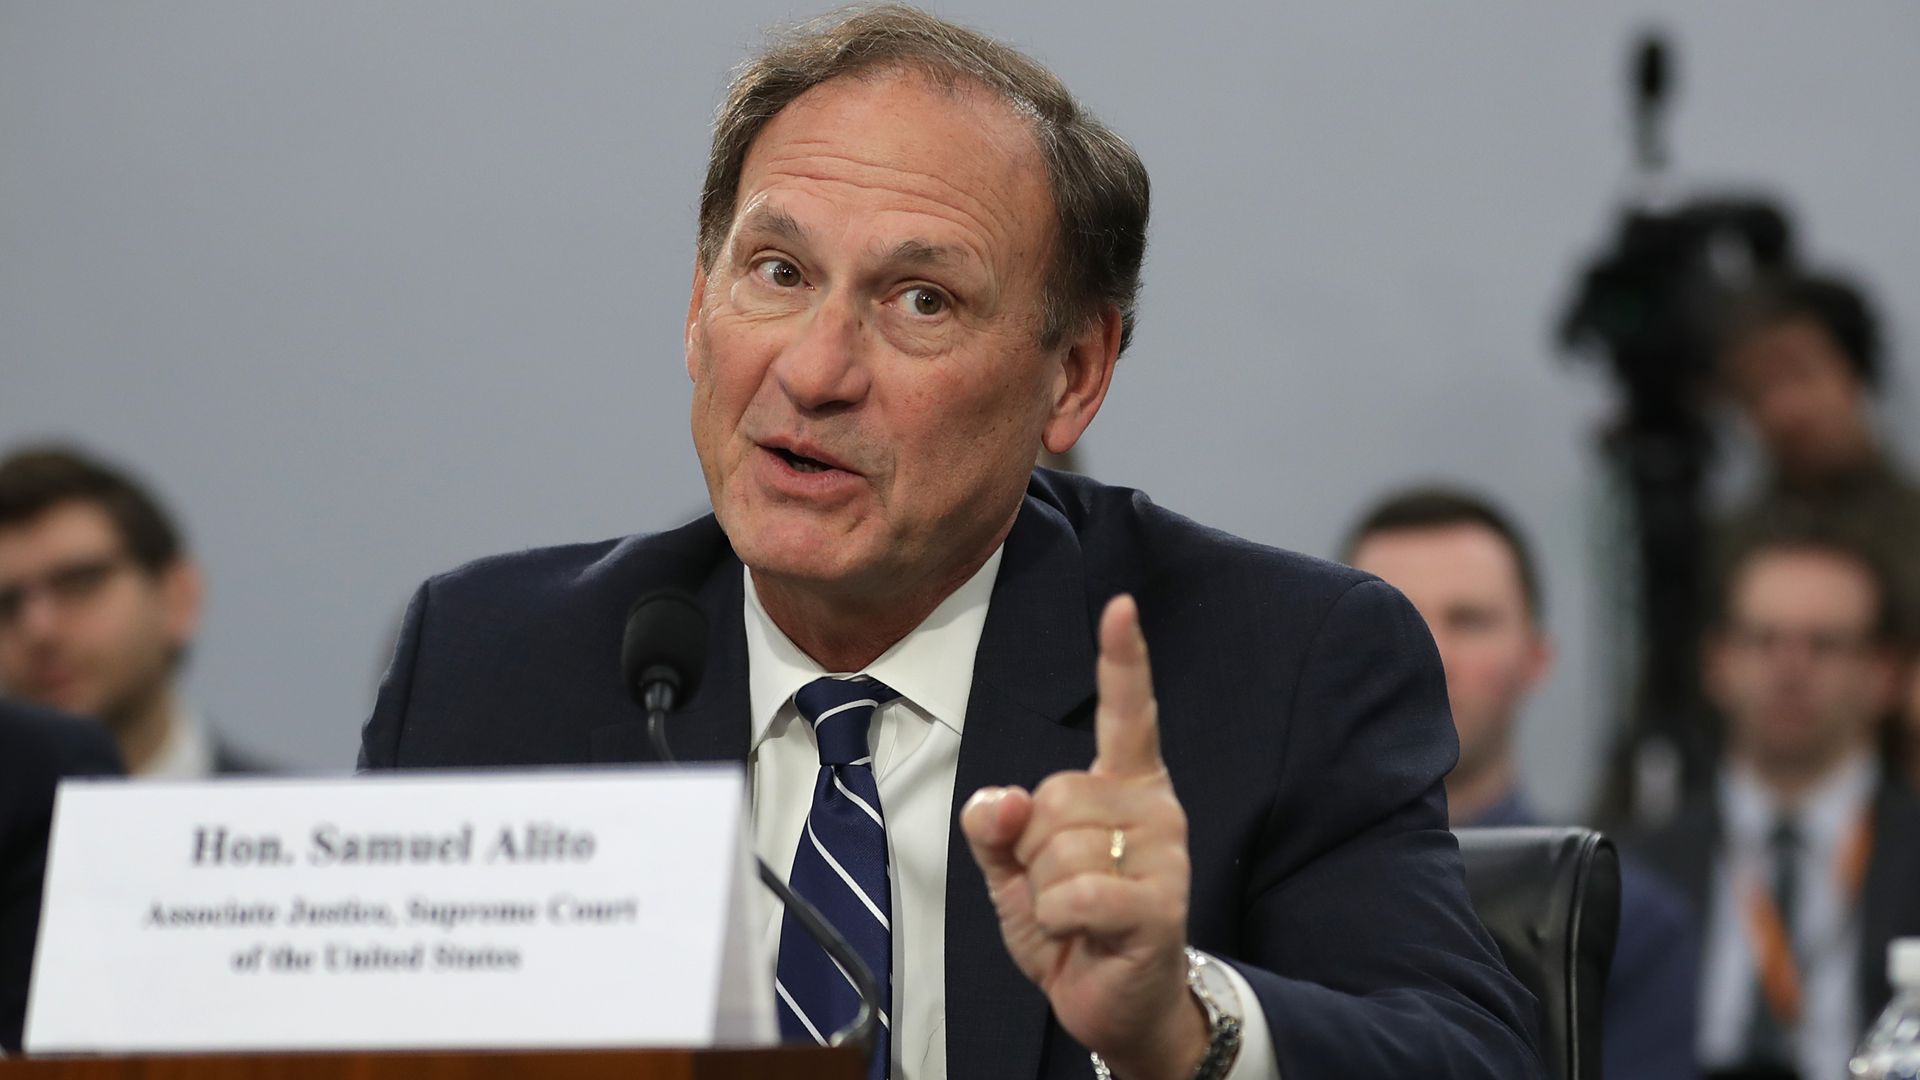 Justice Samuel Alito testifies in front of a House committee in 2019.